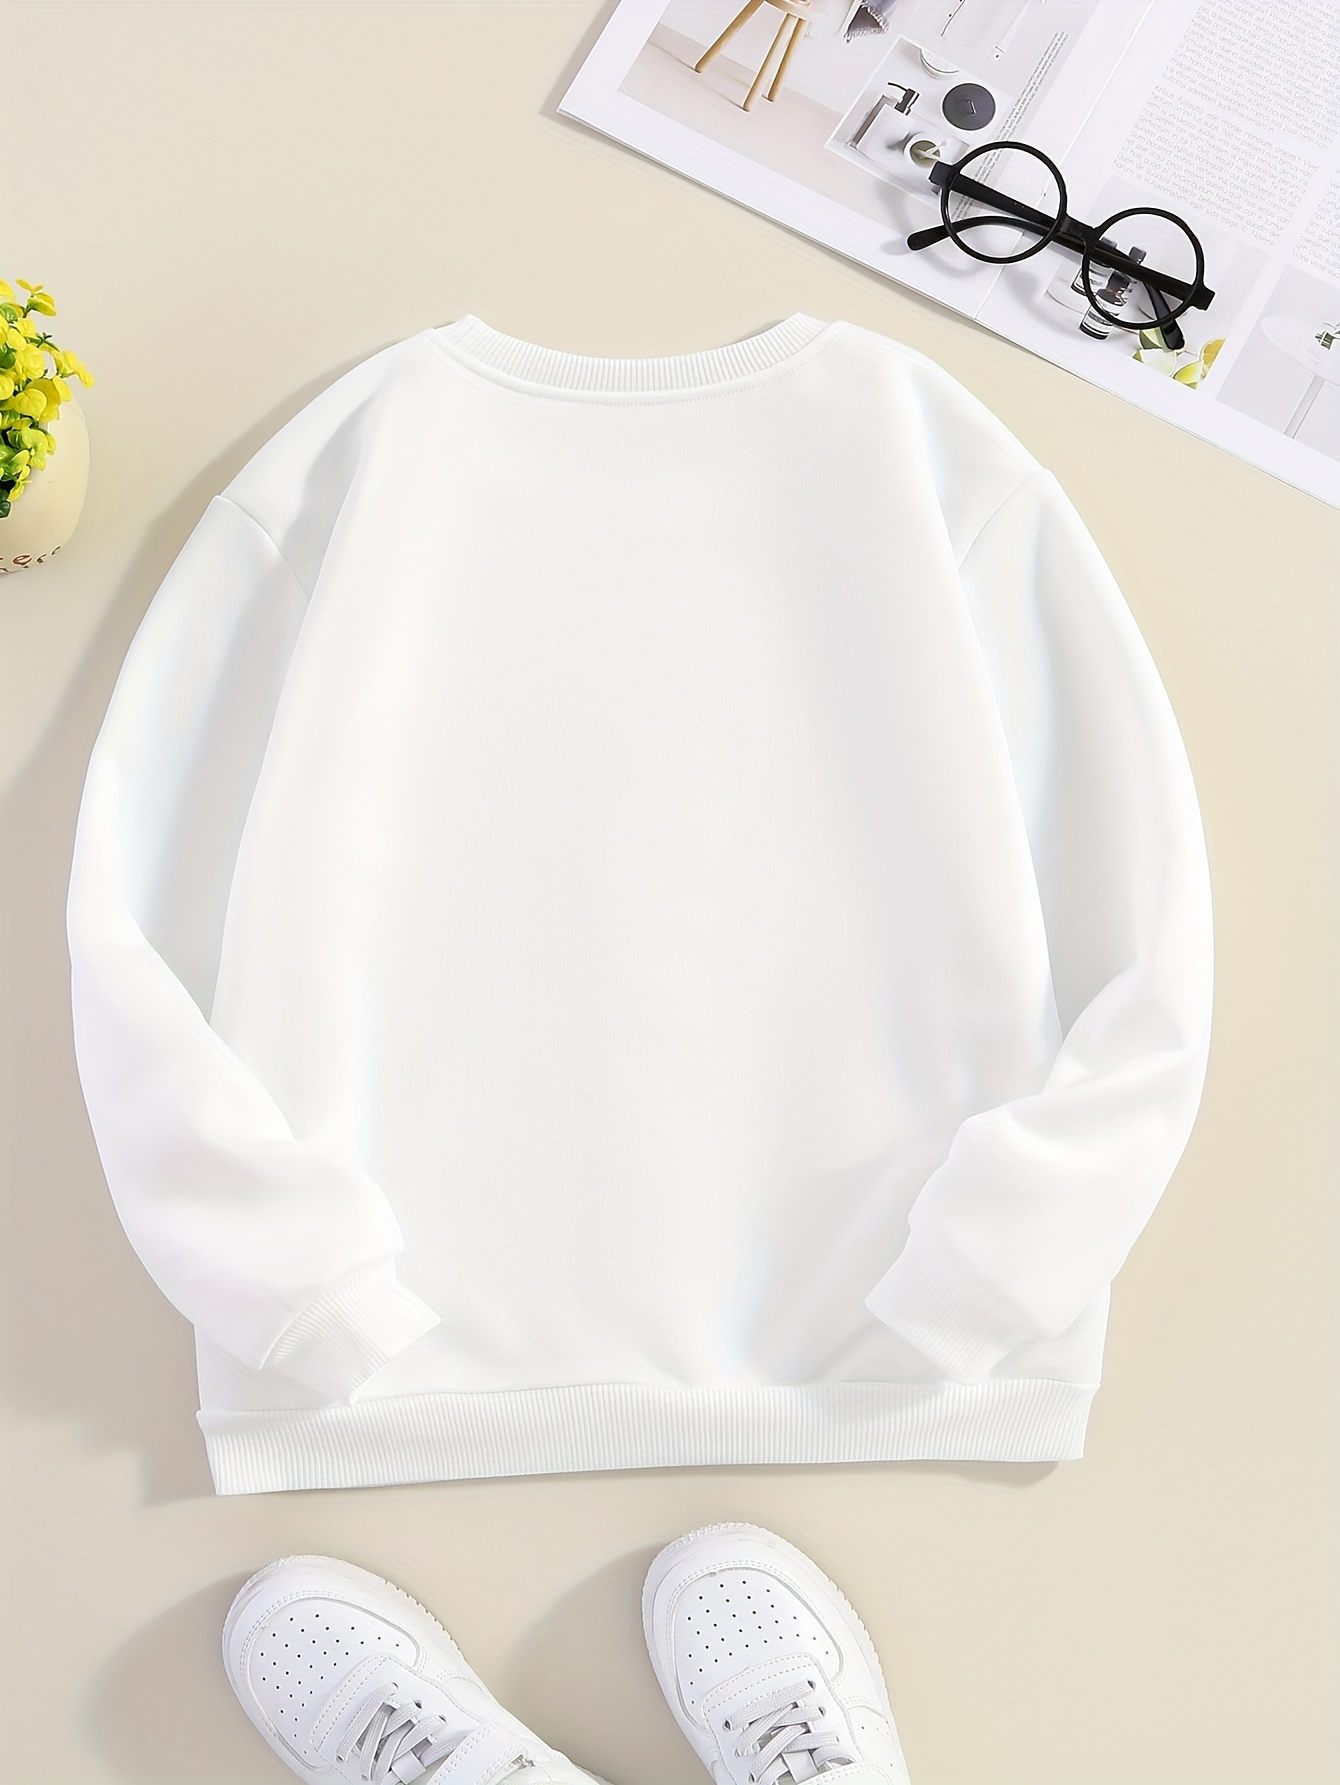 Christmas Shirts for Women Women's Long Sleeved Round Neck Merry Christmas  Printed Pullover Sweater Top Tee Shirt